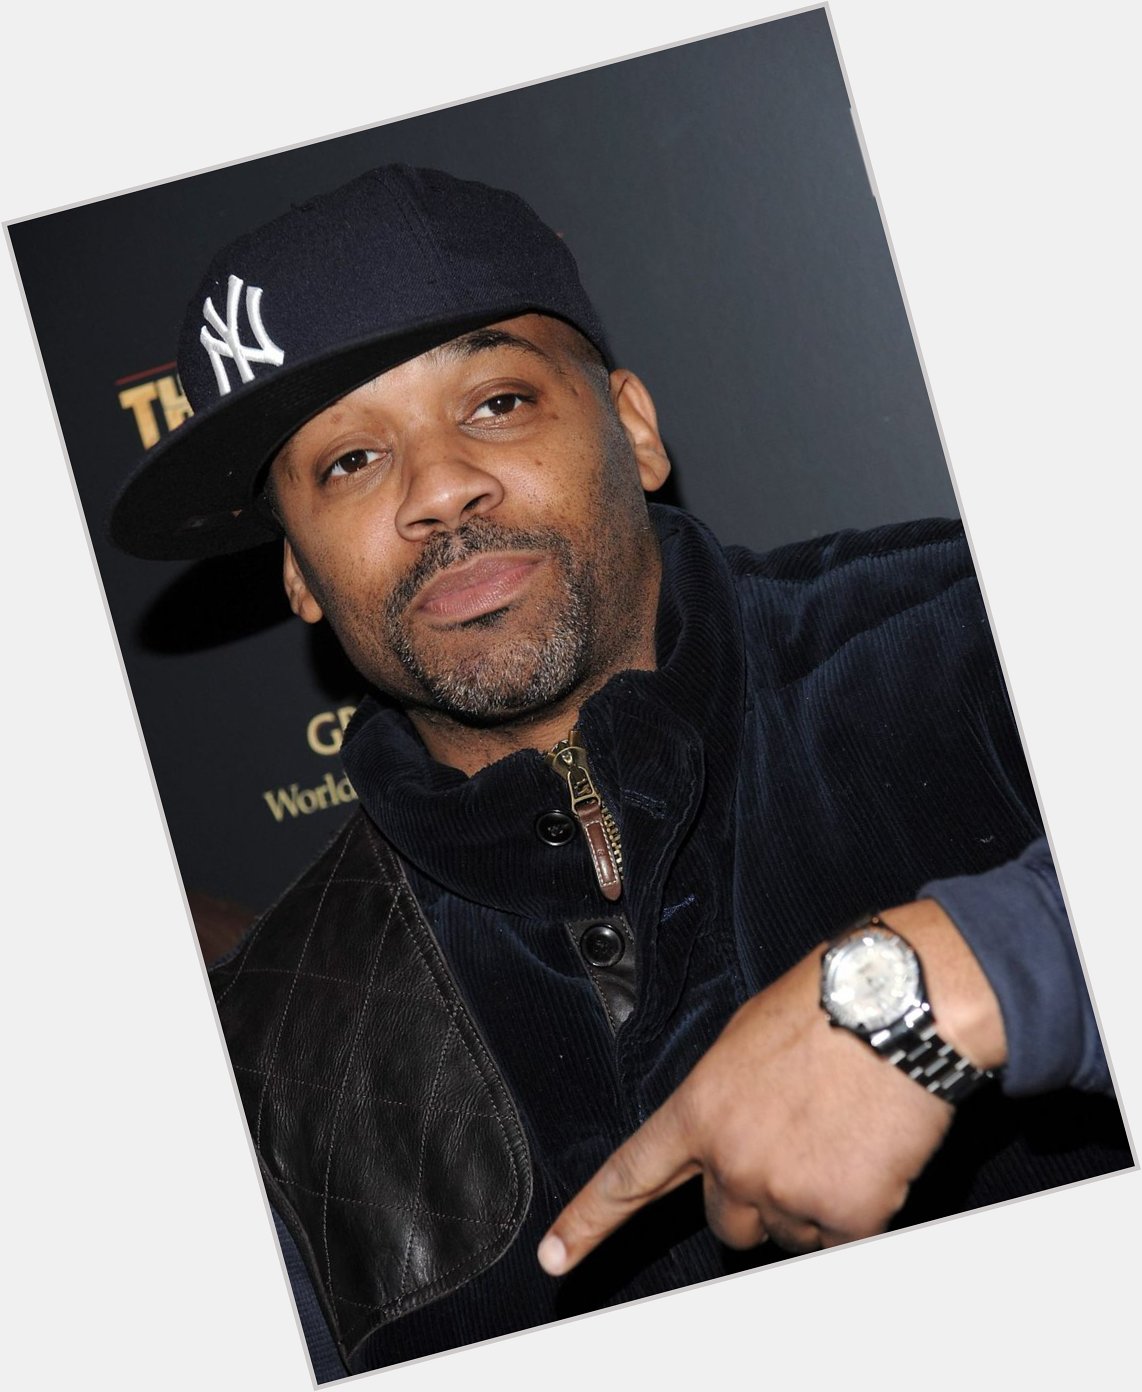 Happy Birthday to entrepreneur, music producer and actor Damon Dash! He turns 46 today. 